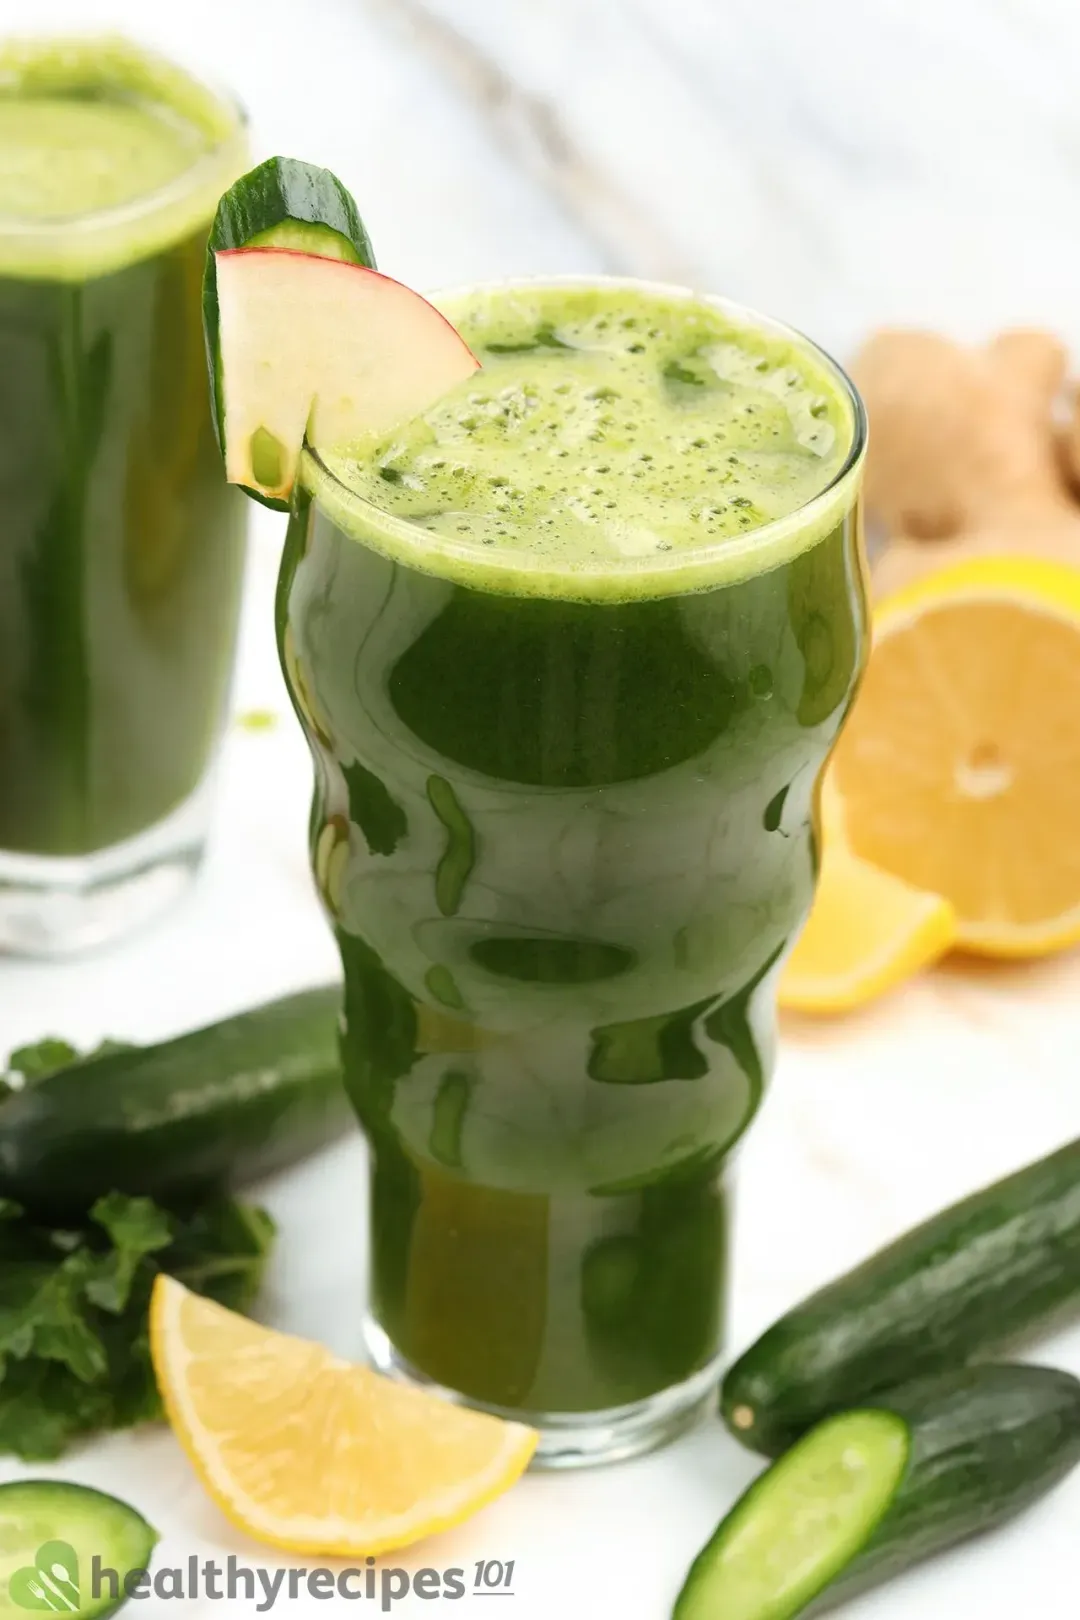 A glass of green juice in the center, surrounded by lemons, cucumbers, and other items in the background